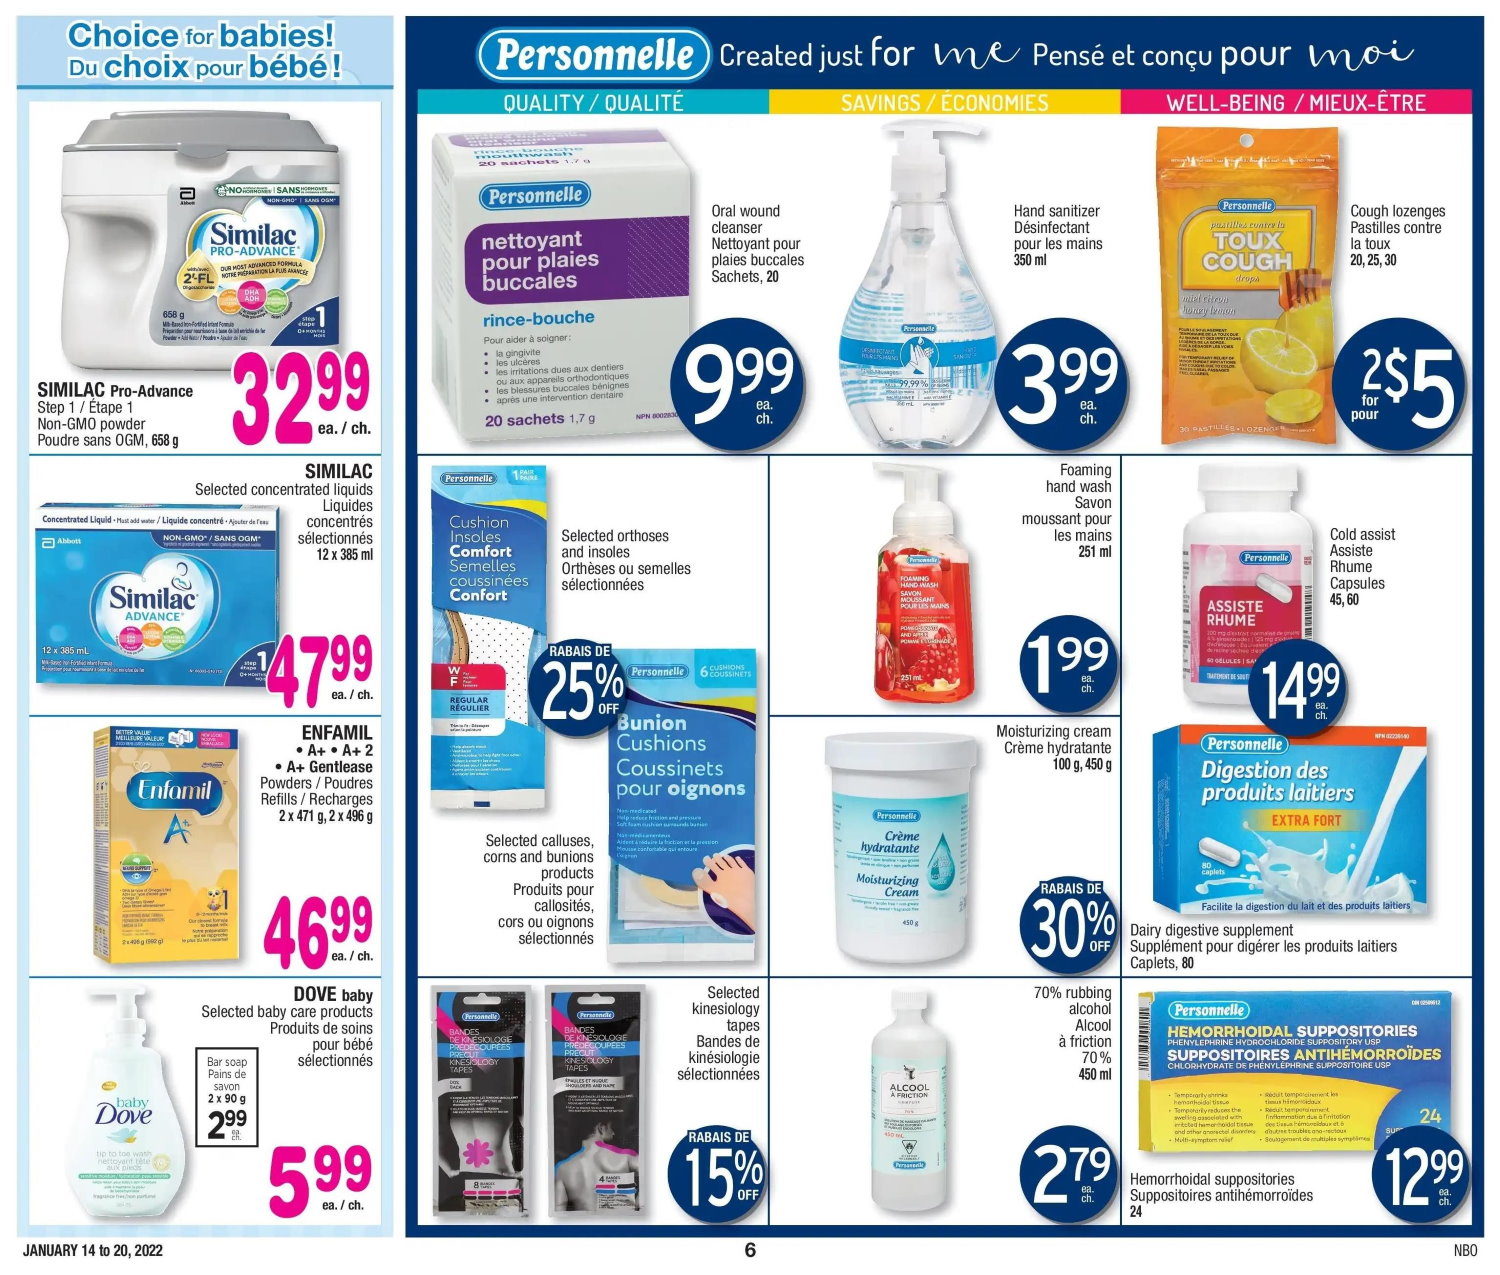 Jean Coutu - Even More Savings - Weekly Flyer Specials - Page 6